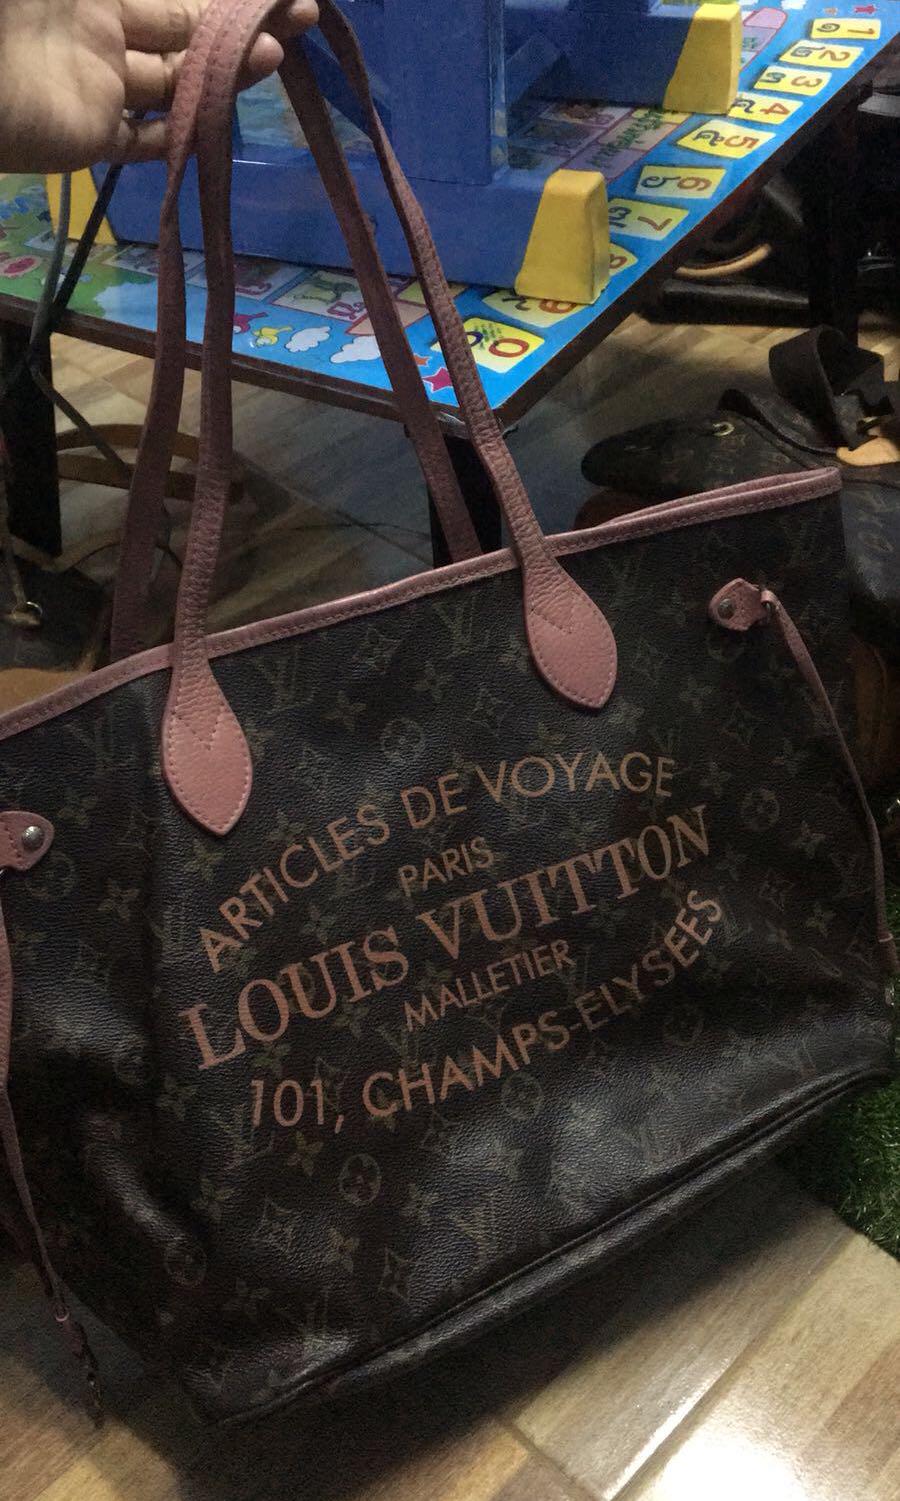 LOUIS VUITTON Neverfull GM Limited Edition Monogram Ikat Tote Bag Rose